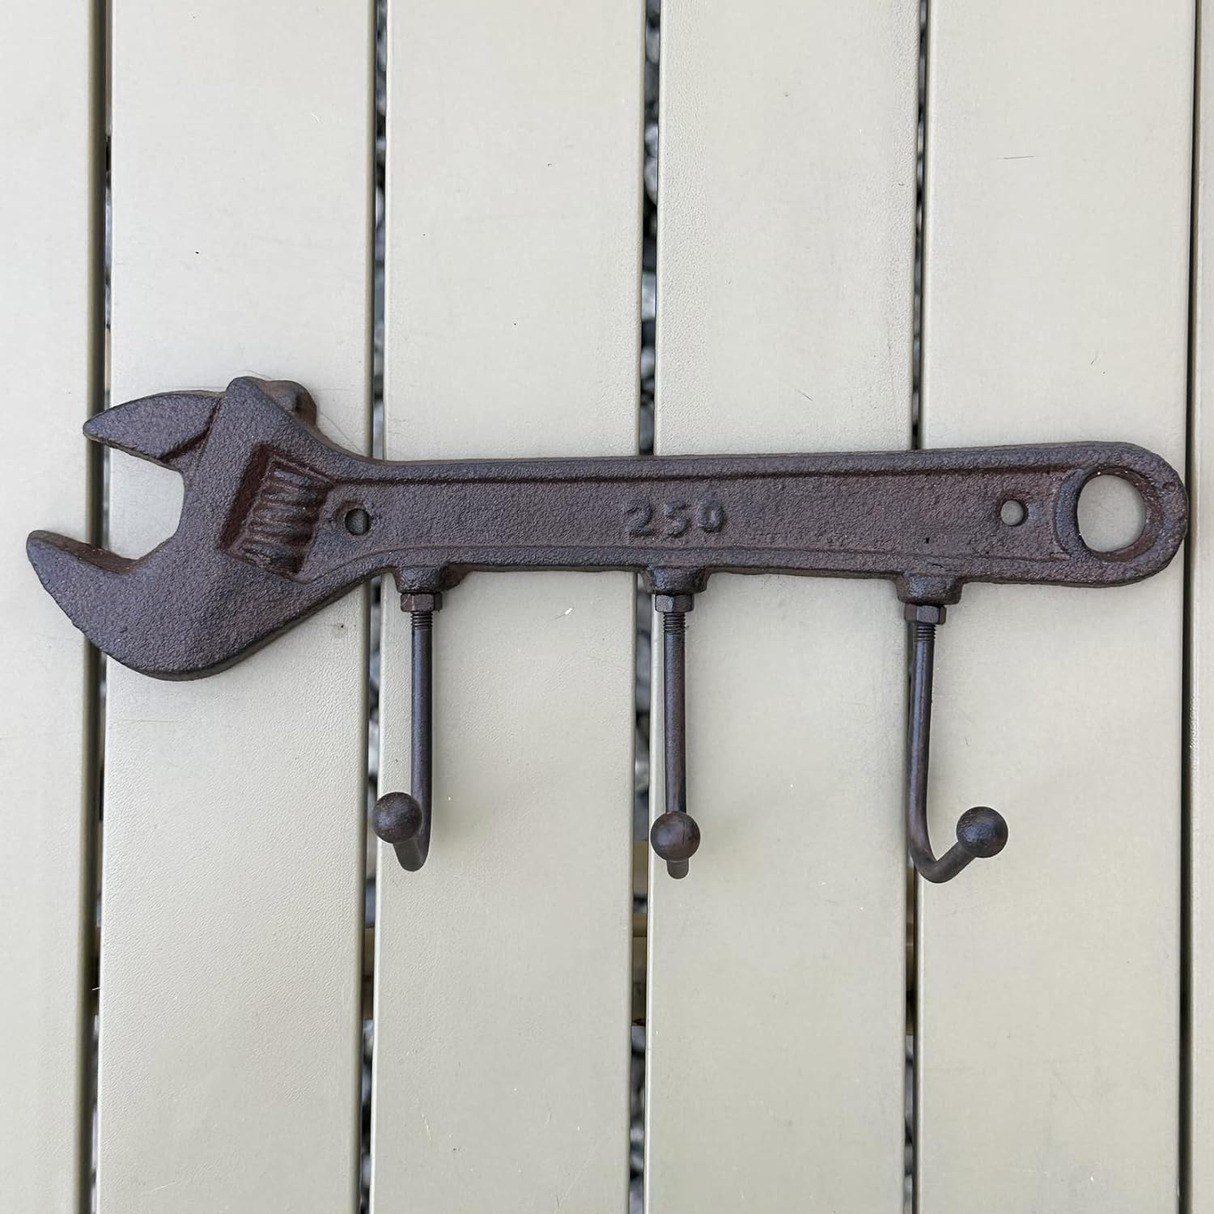 Vintage Wrench Key Holder Decorative Man Cave Retro Cast Iron Fathers Day Gift